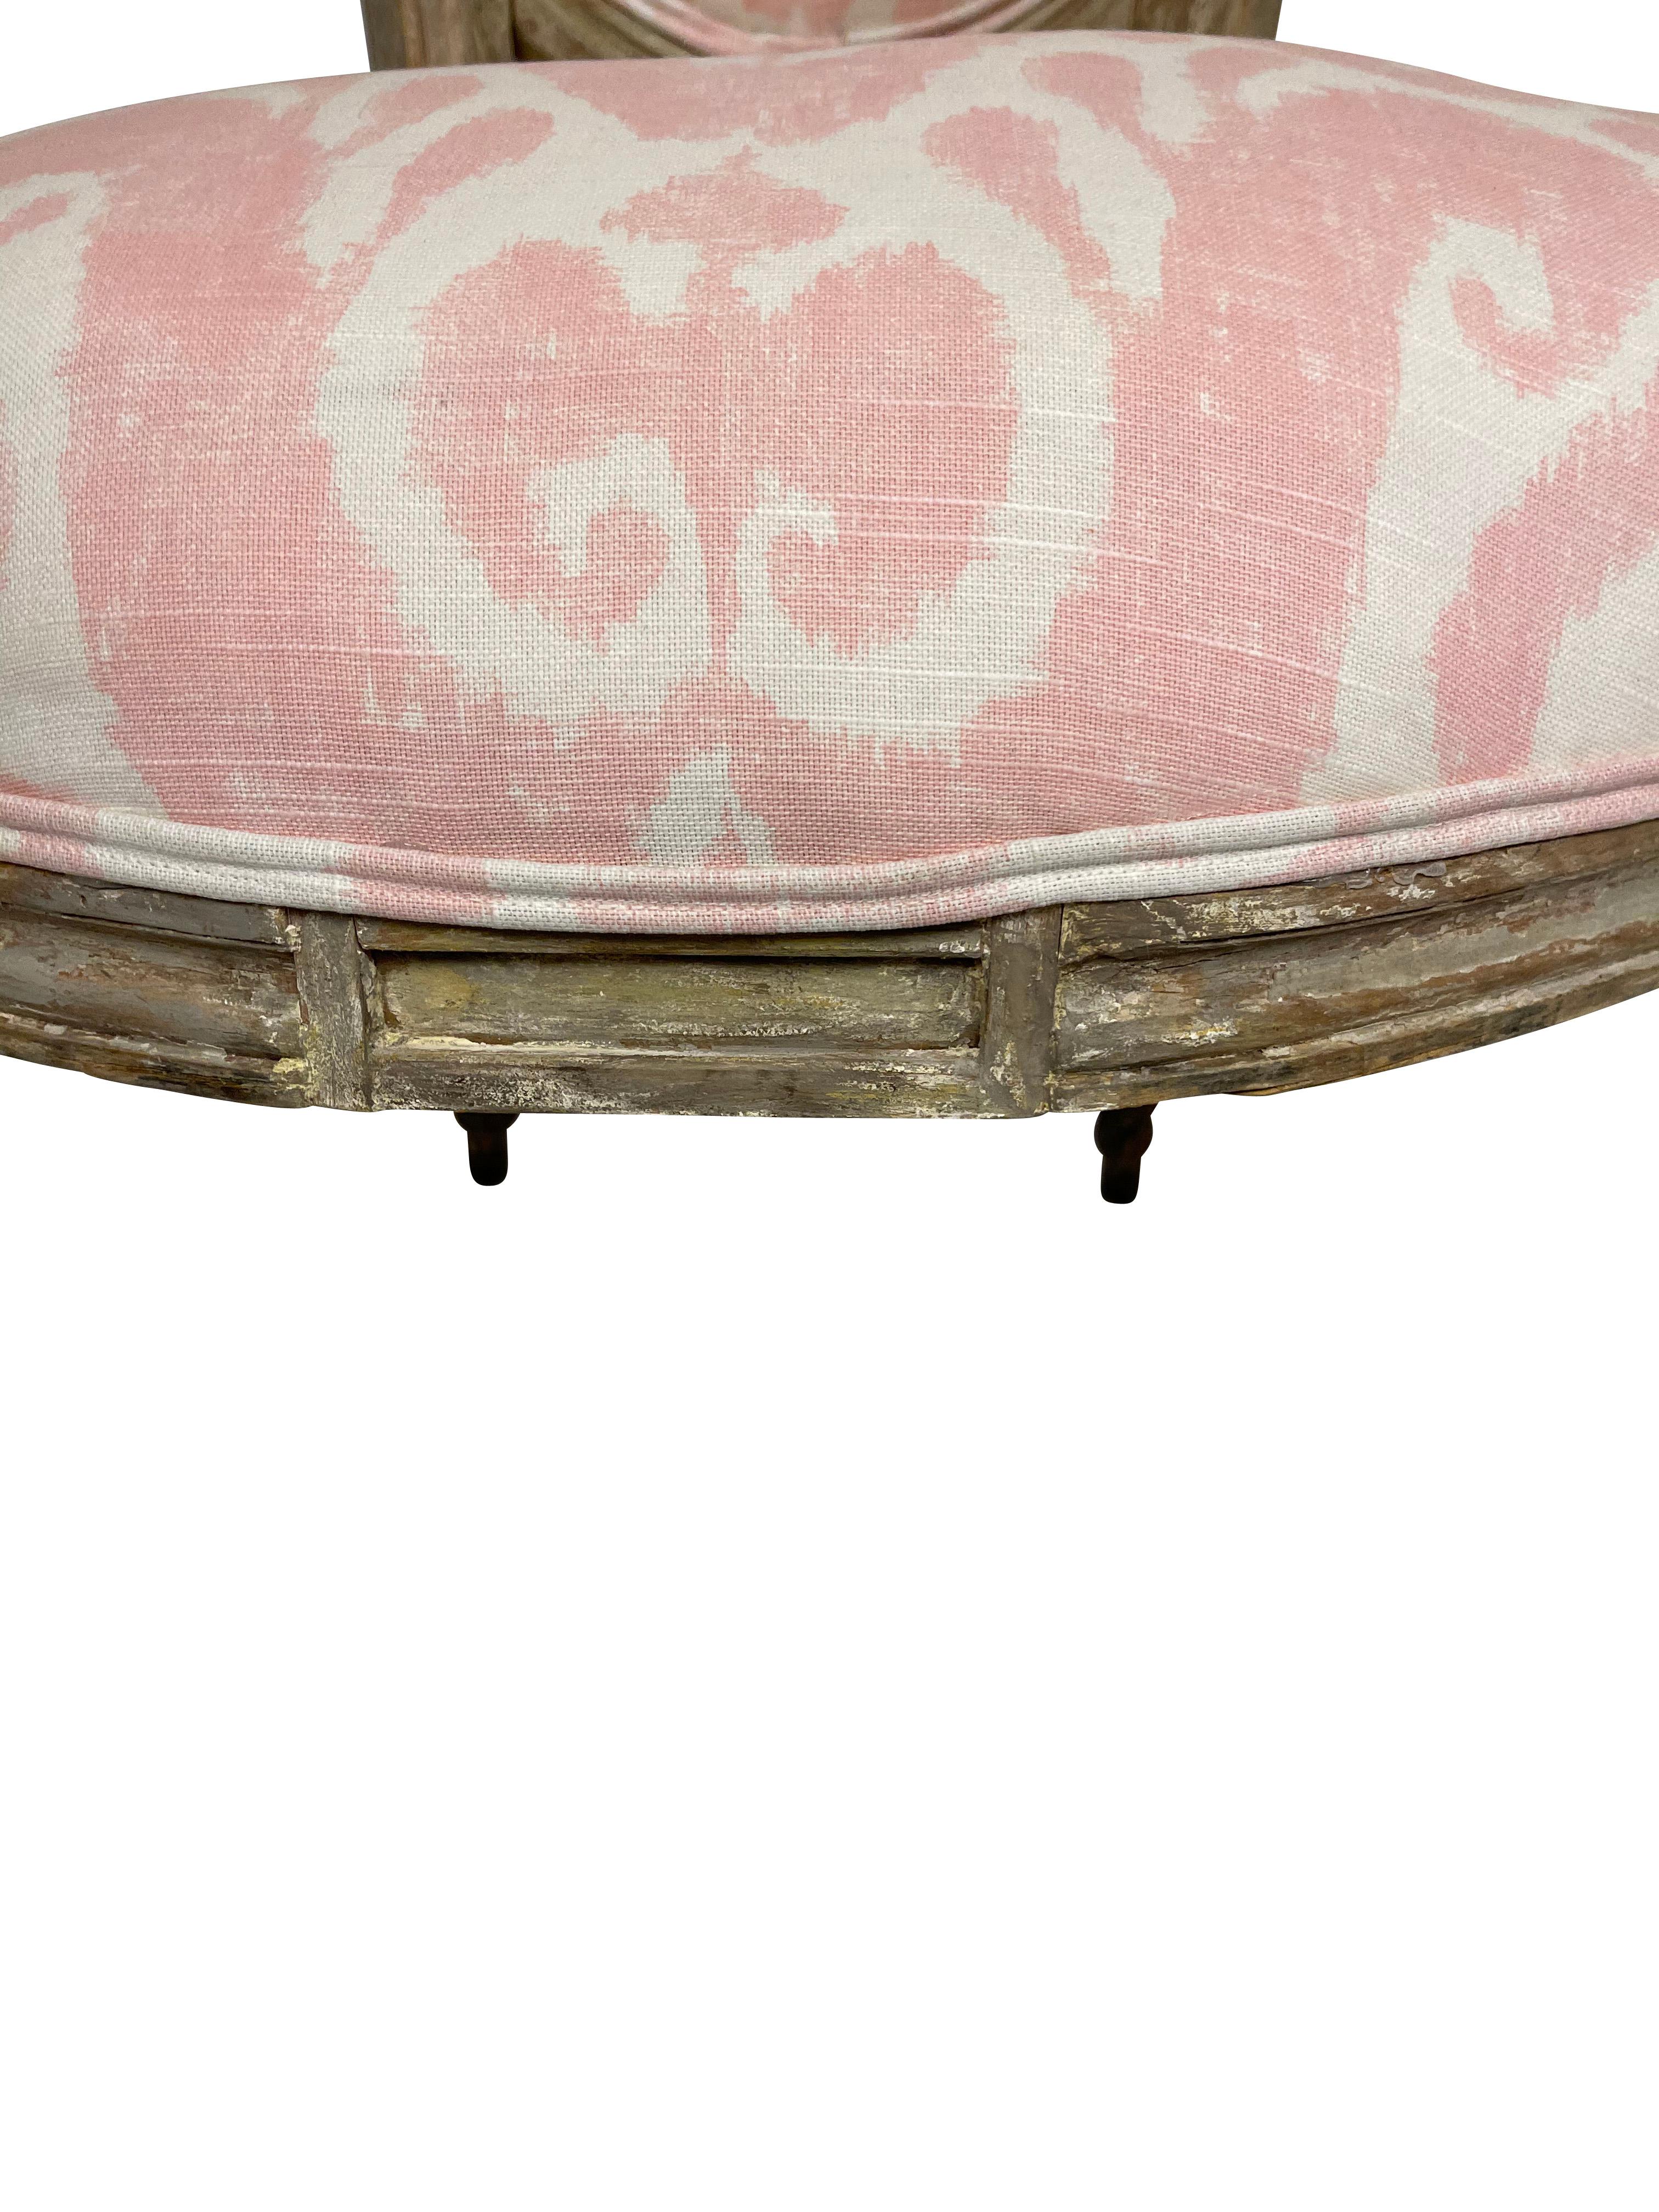 20th Century Louis XVI Style Grey Painted Armchairs in Pink and White Ikat Upholstery For Sale